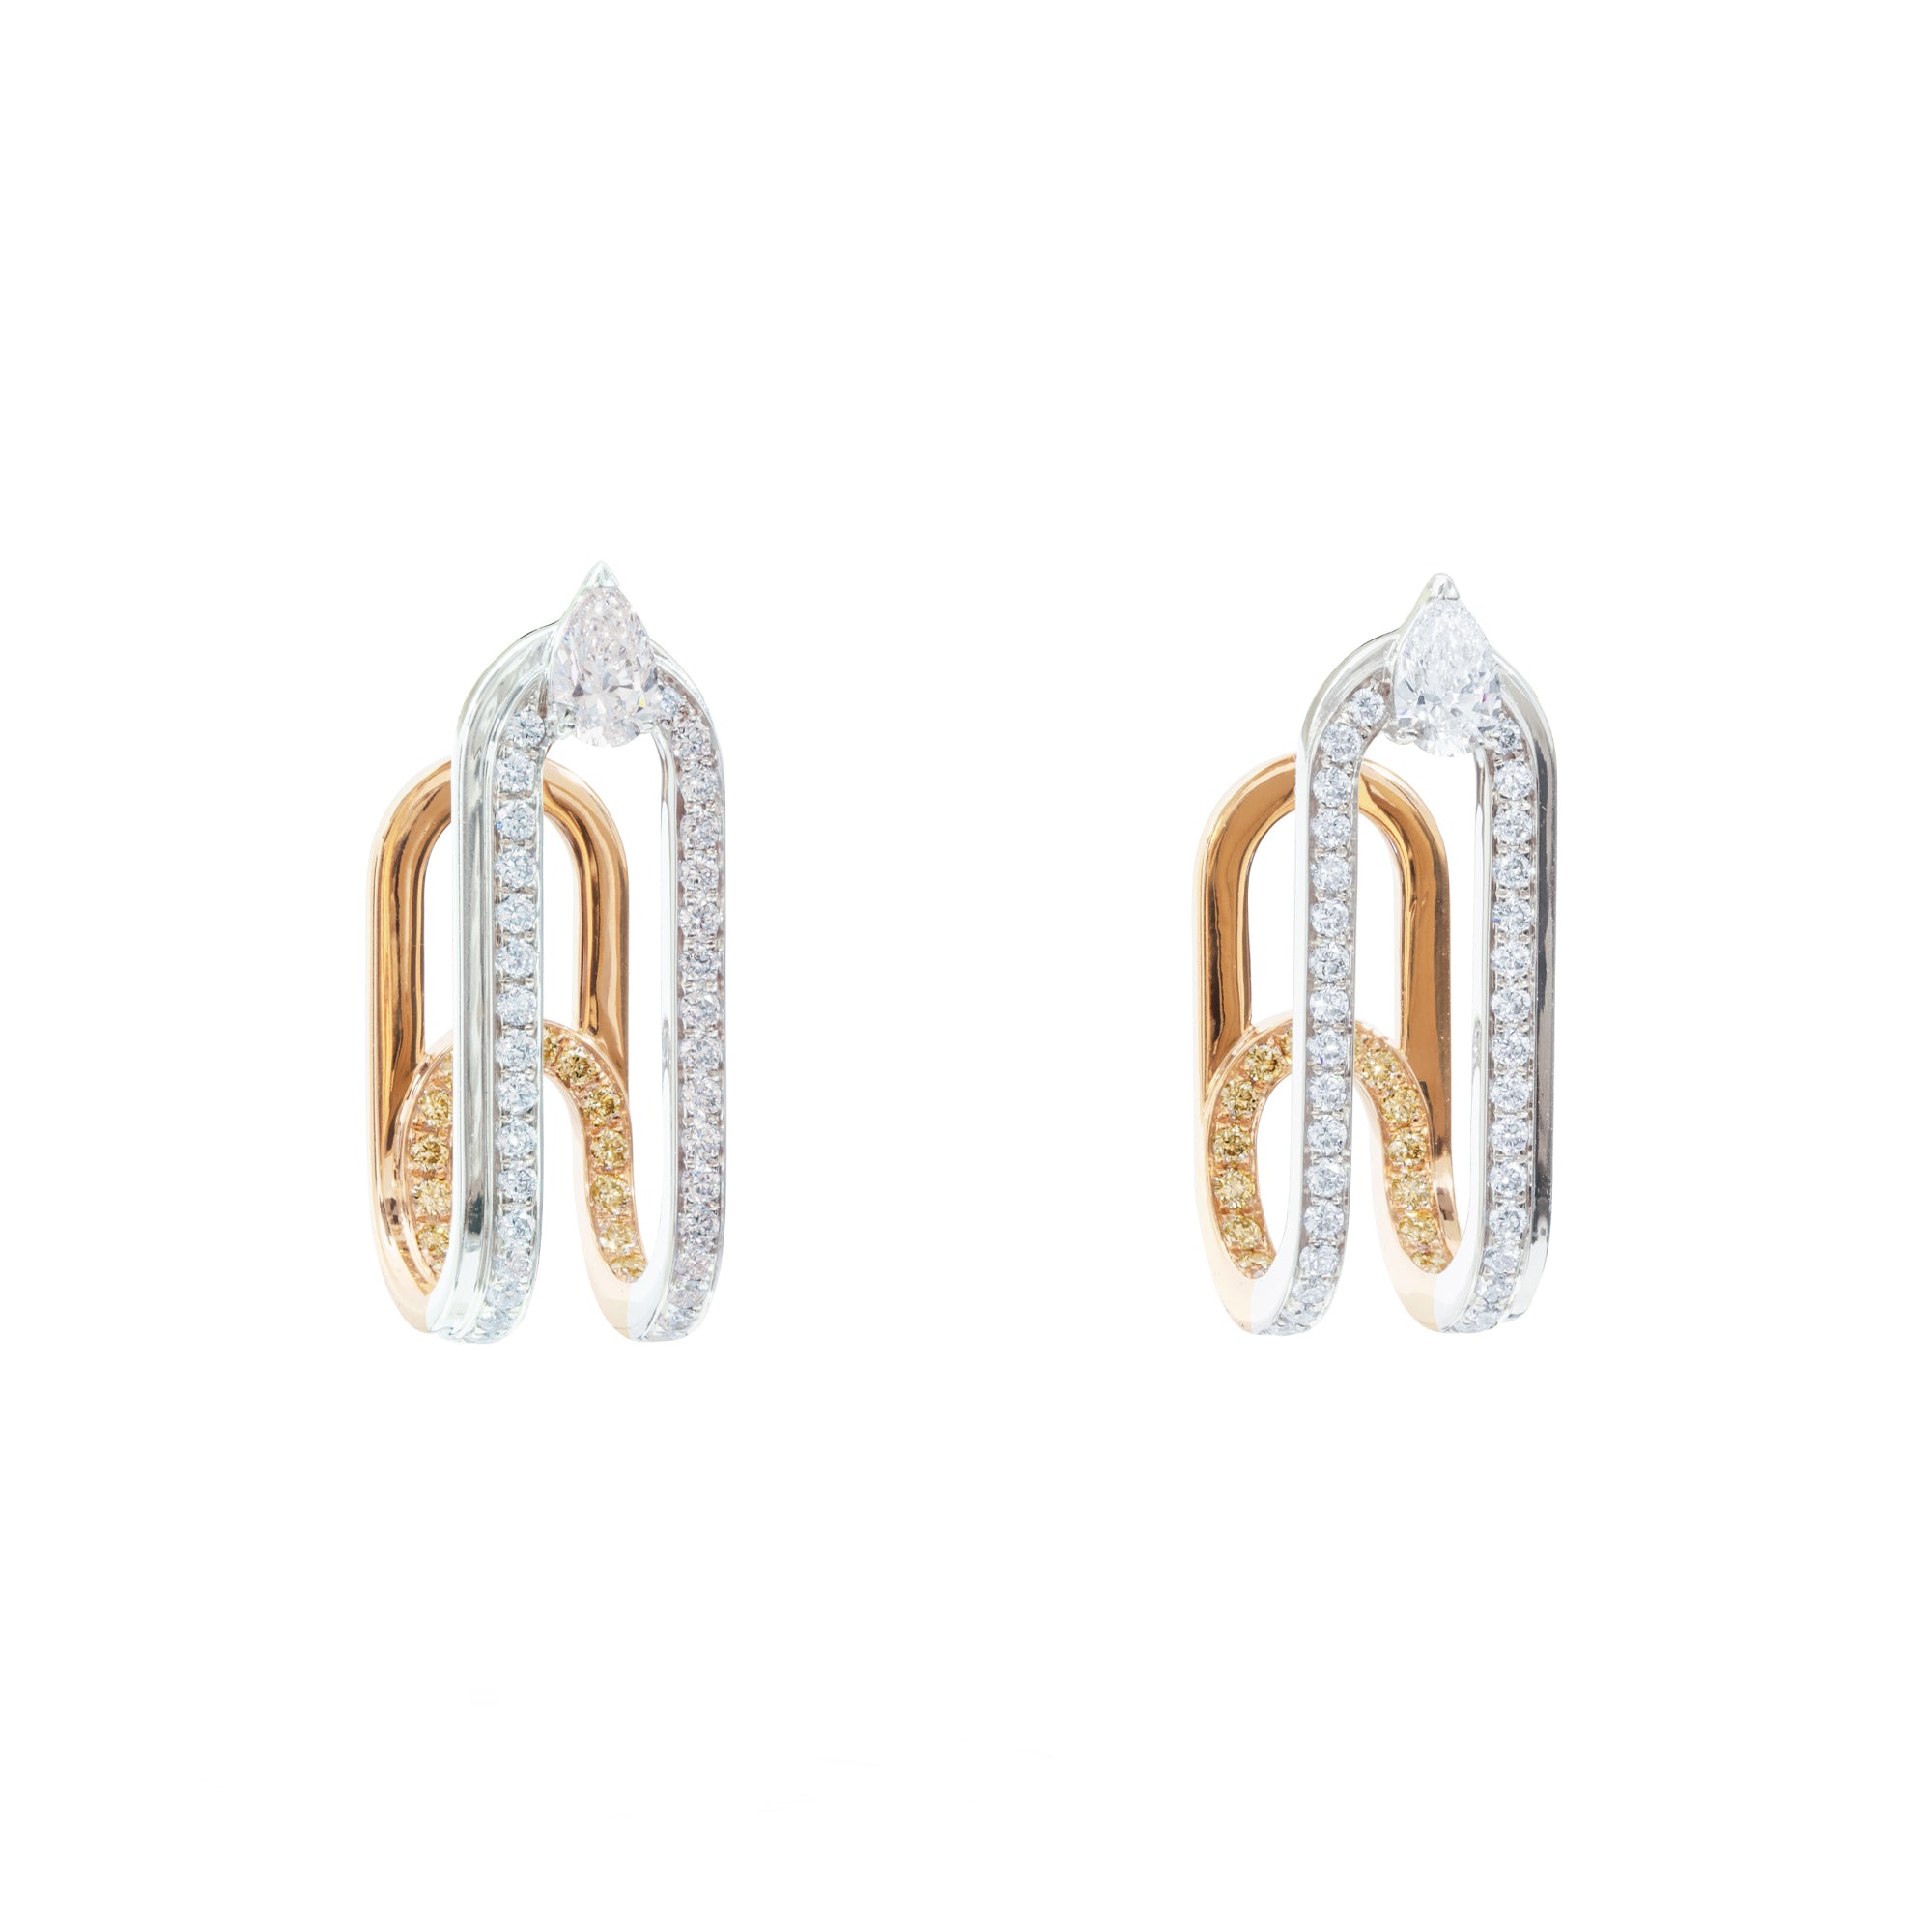 Clip White Rose Gold Earrings With Diamonds And Fancy